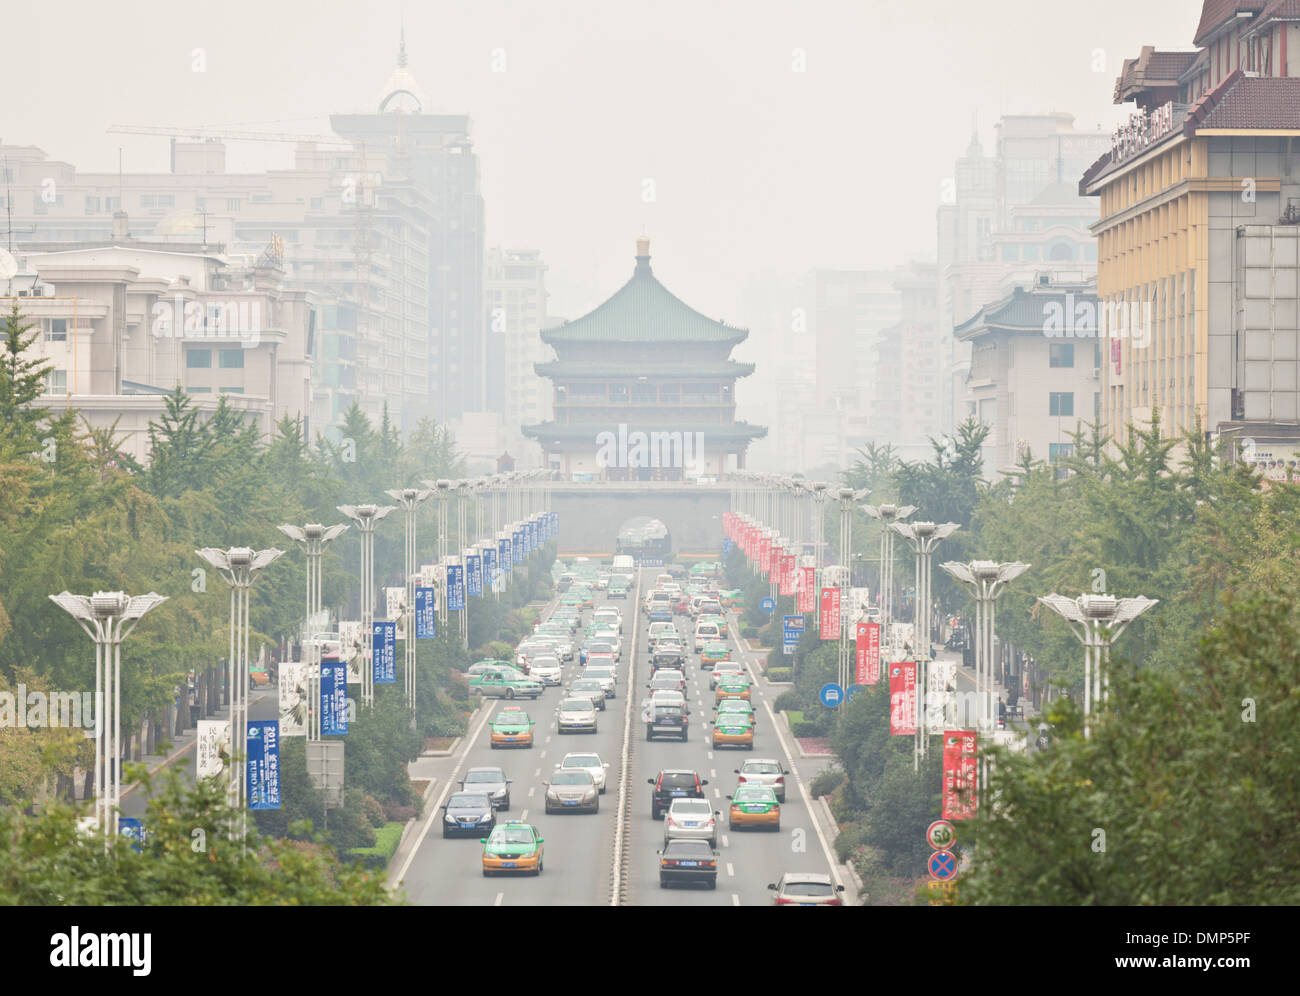 Bell tower on a misty hot day Xian city centre Shaanxi Province, PRC, People's Republic of China, Asia Stock Photo